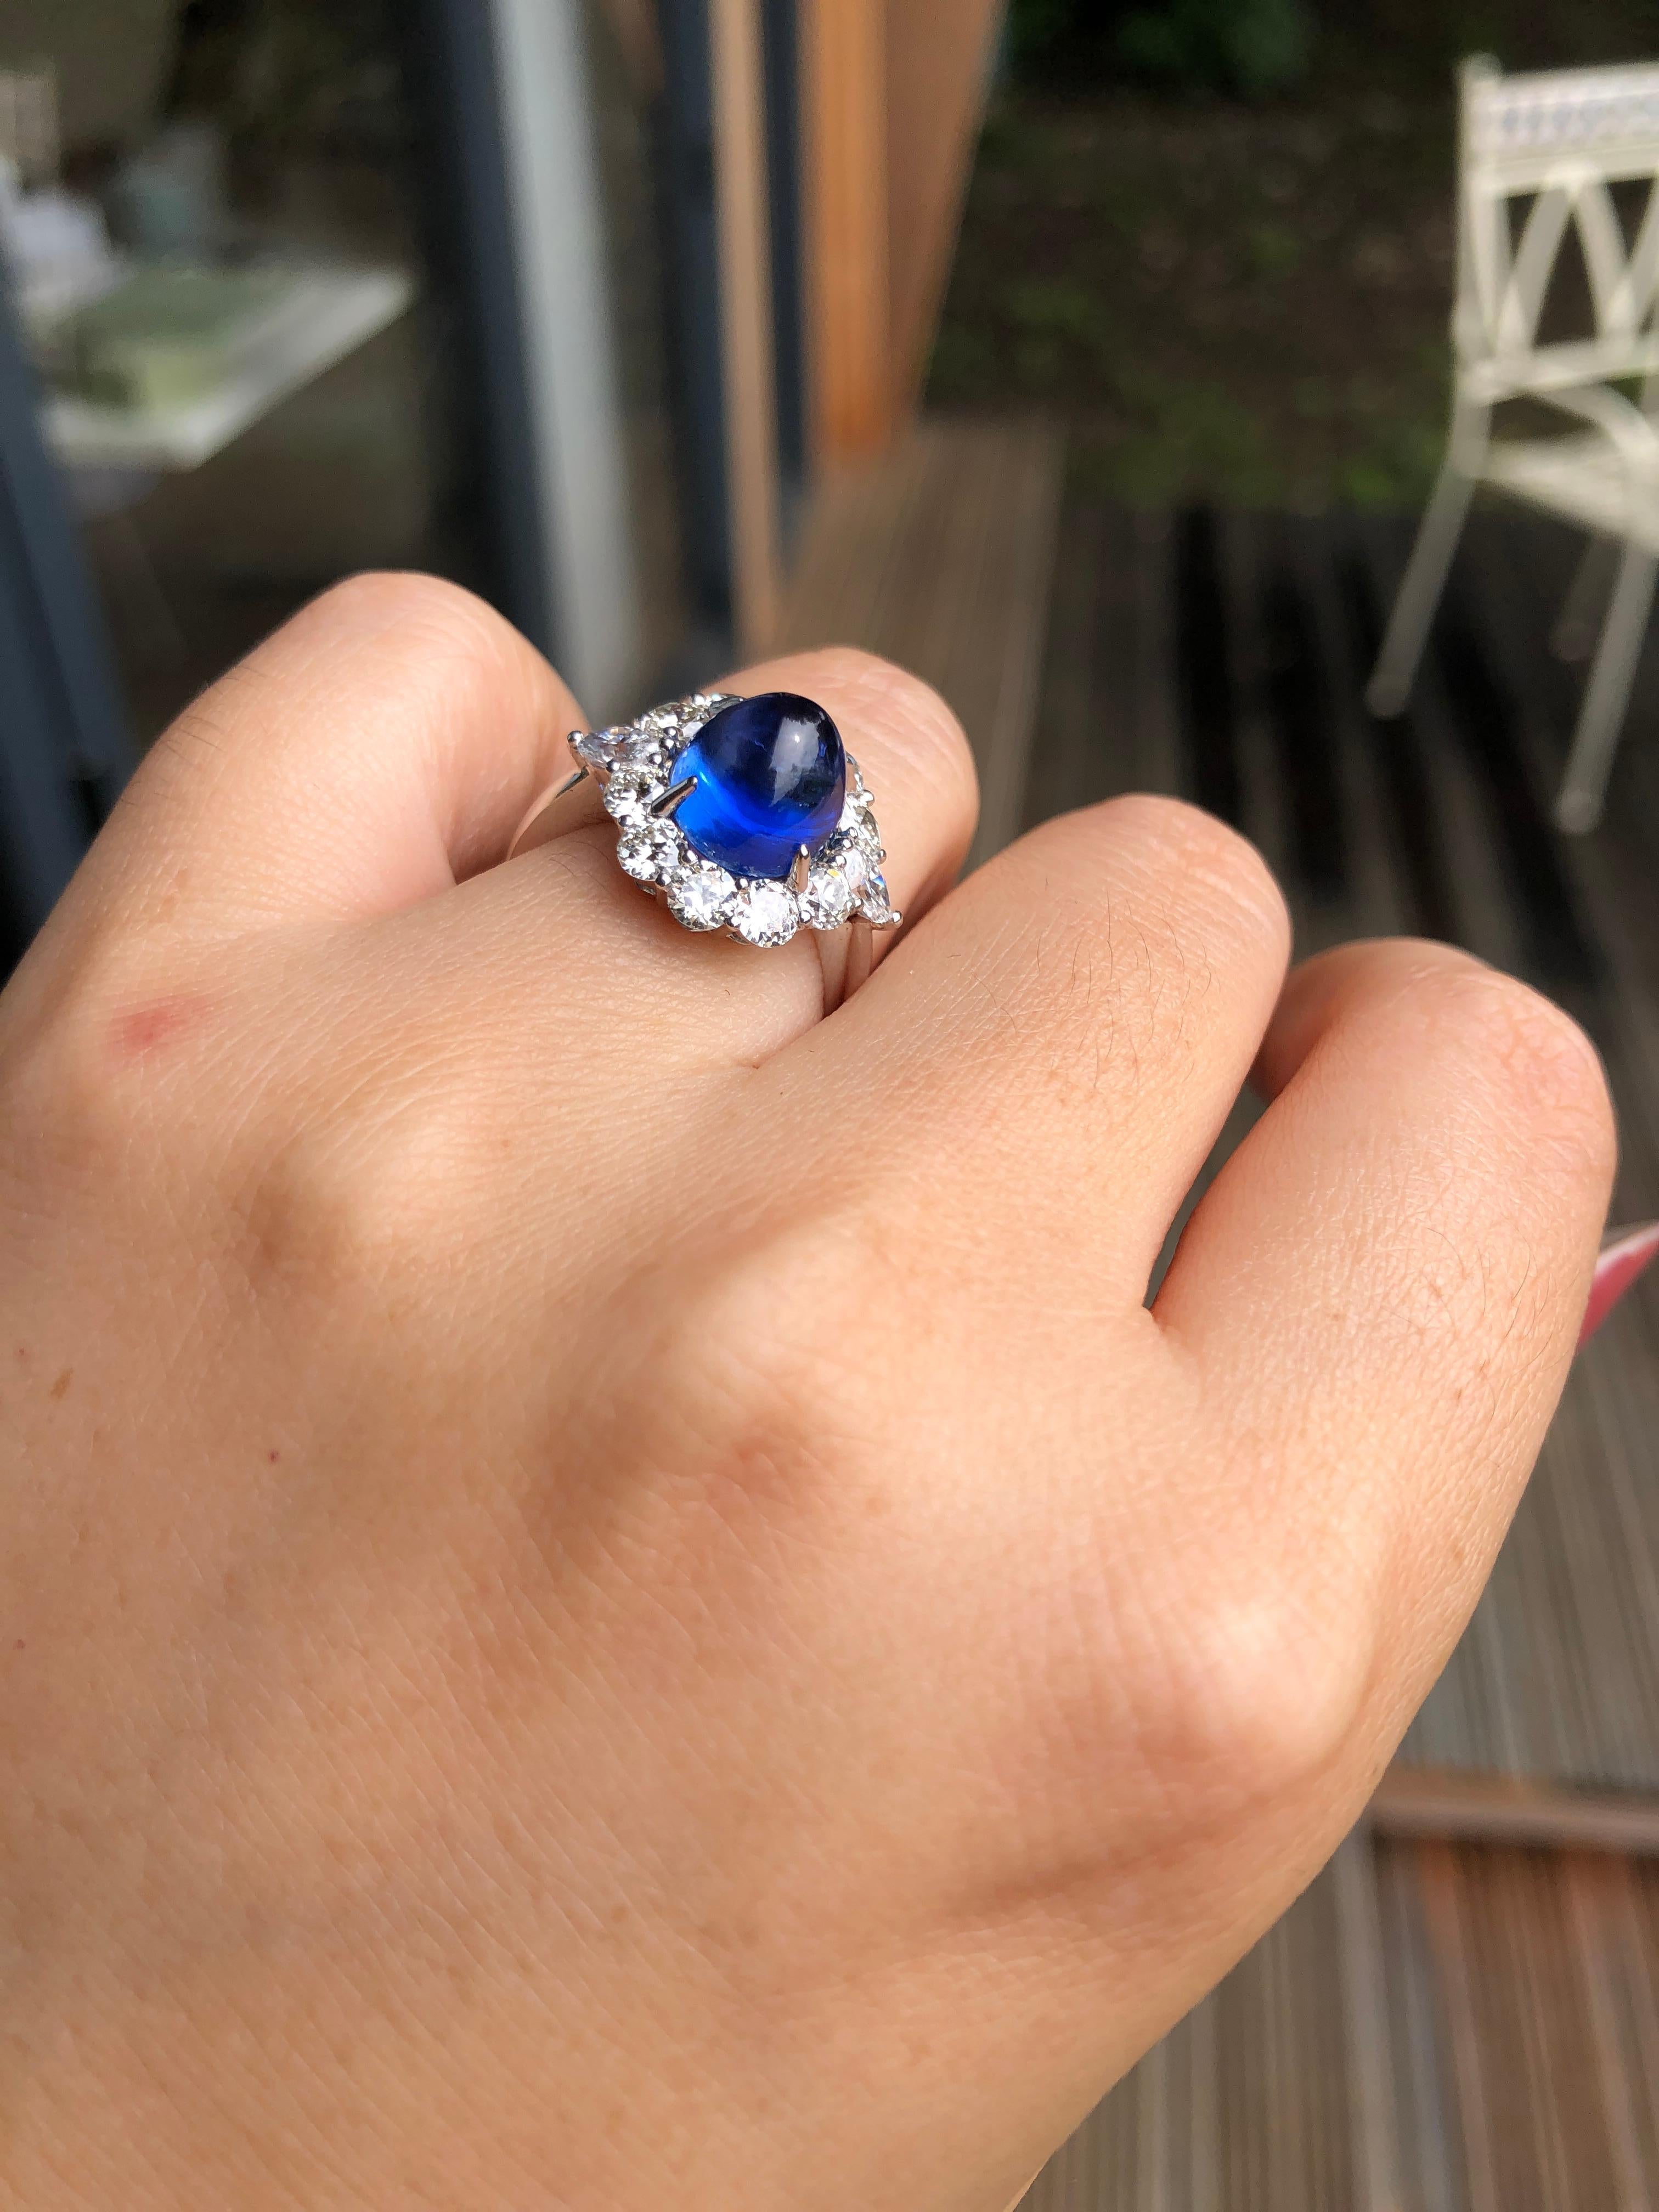 Sapphire: 6.35ct
Total Diamonds: 1.6ct
Size: UK size N, US size 6 1/2
Weight：5.33g

An arresting cabochon sapphire  and diamond ring. When a sapphire is cut as a cabochon it gains a mysterious quality, as though you are looking out into space or the